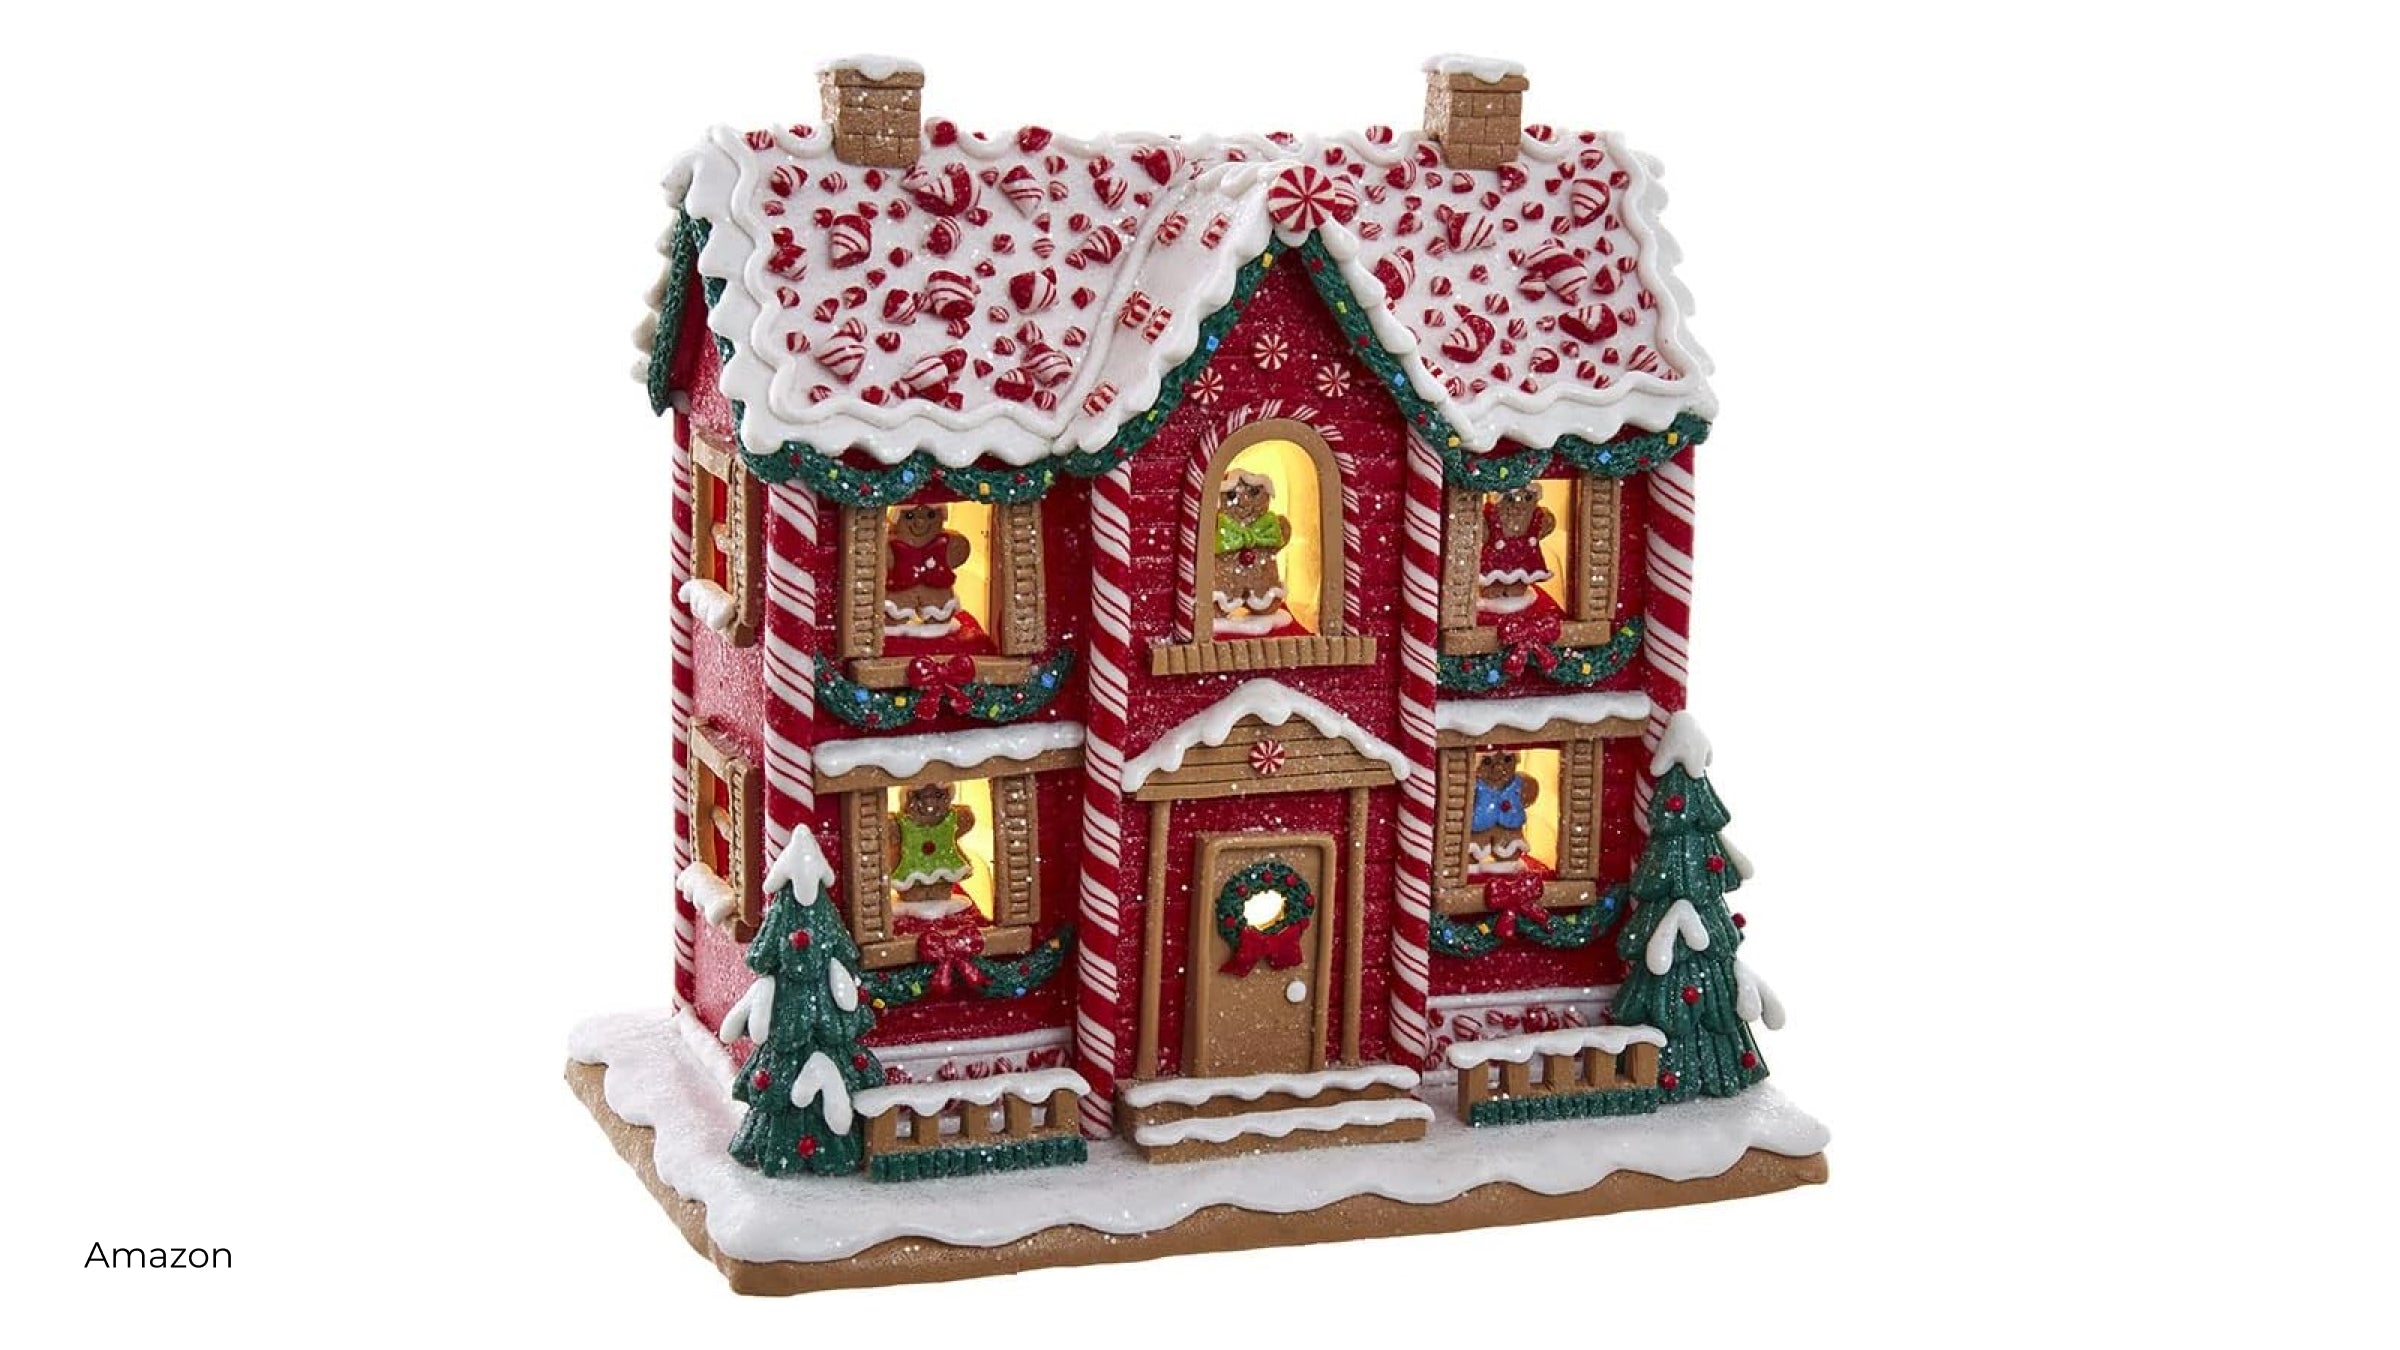 LED peppermint gingerbread house frm Amazon